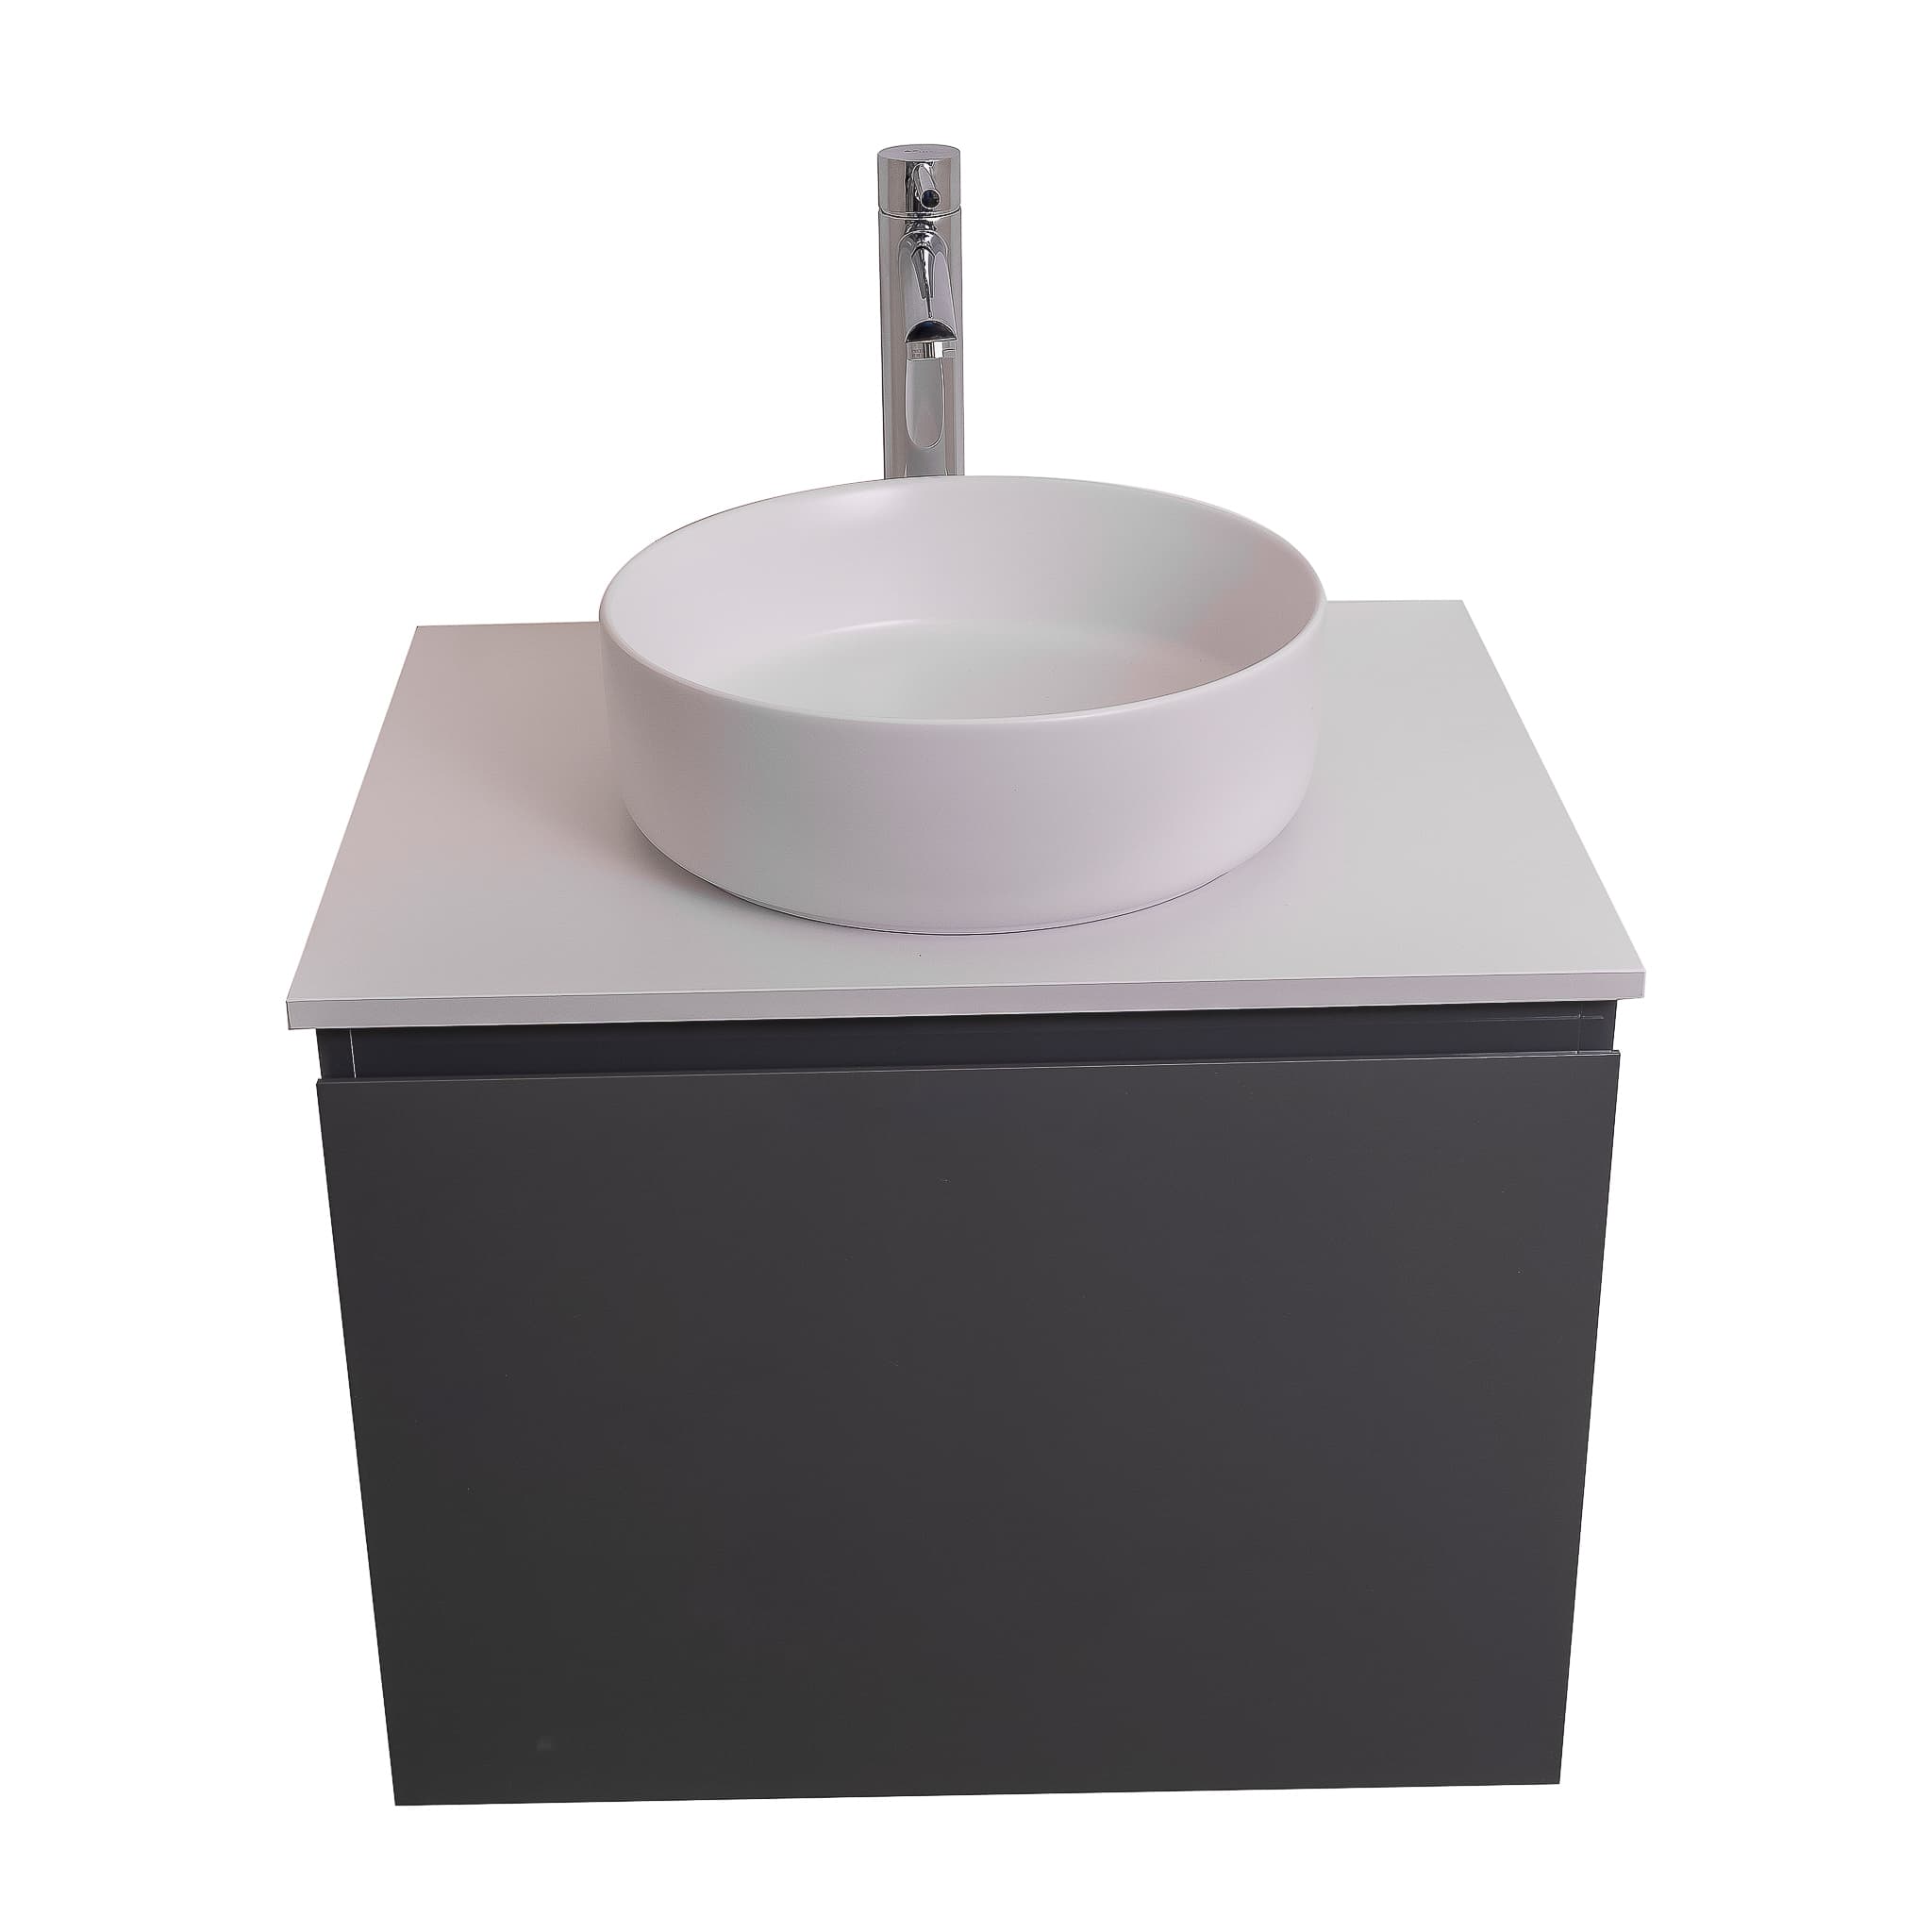 Venice 23.5 Anthracite High Gloss Cabinet, Ares White Top And Ares White Ceramic Basin, Wall Mounted Modern Vanity Set